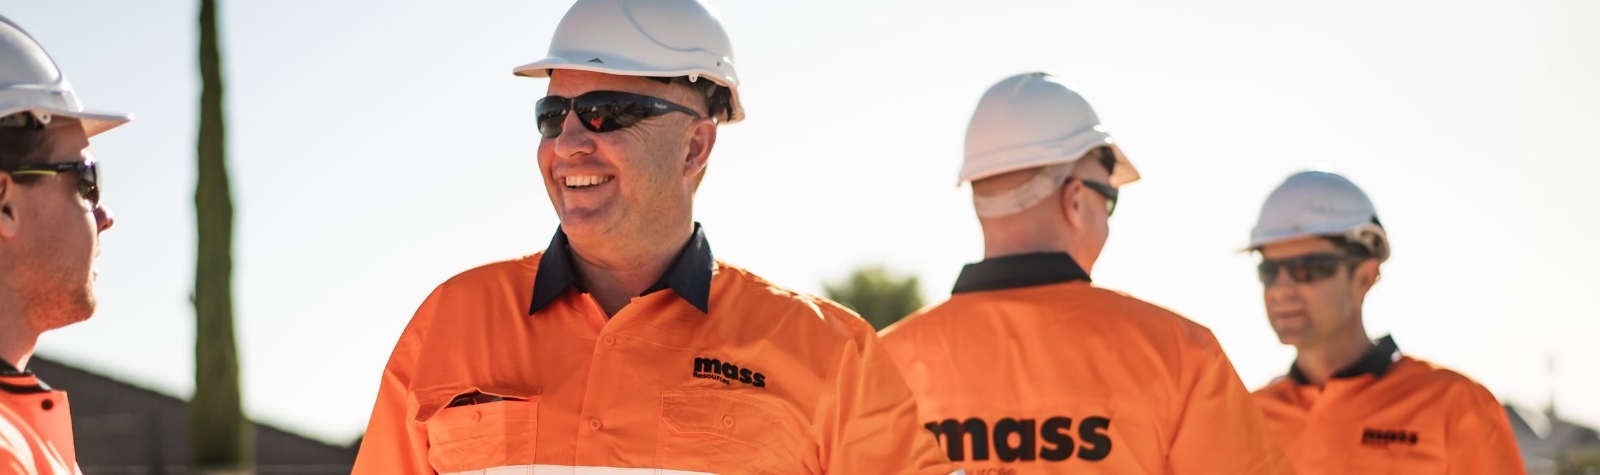 Mass Resources is growing in Darwin by putting the right people in the right place